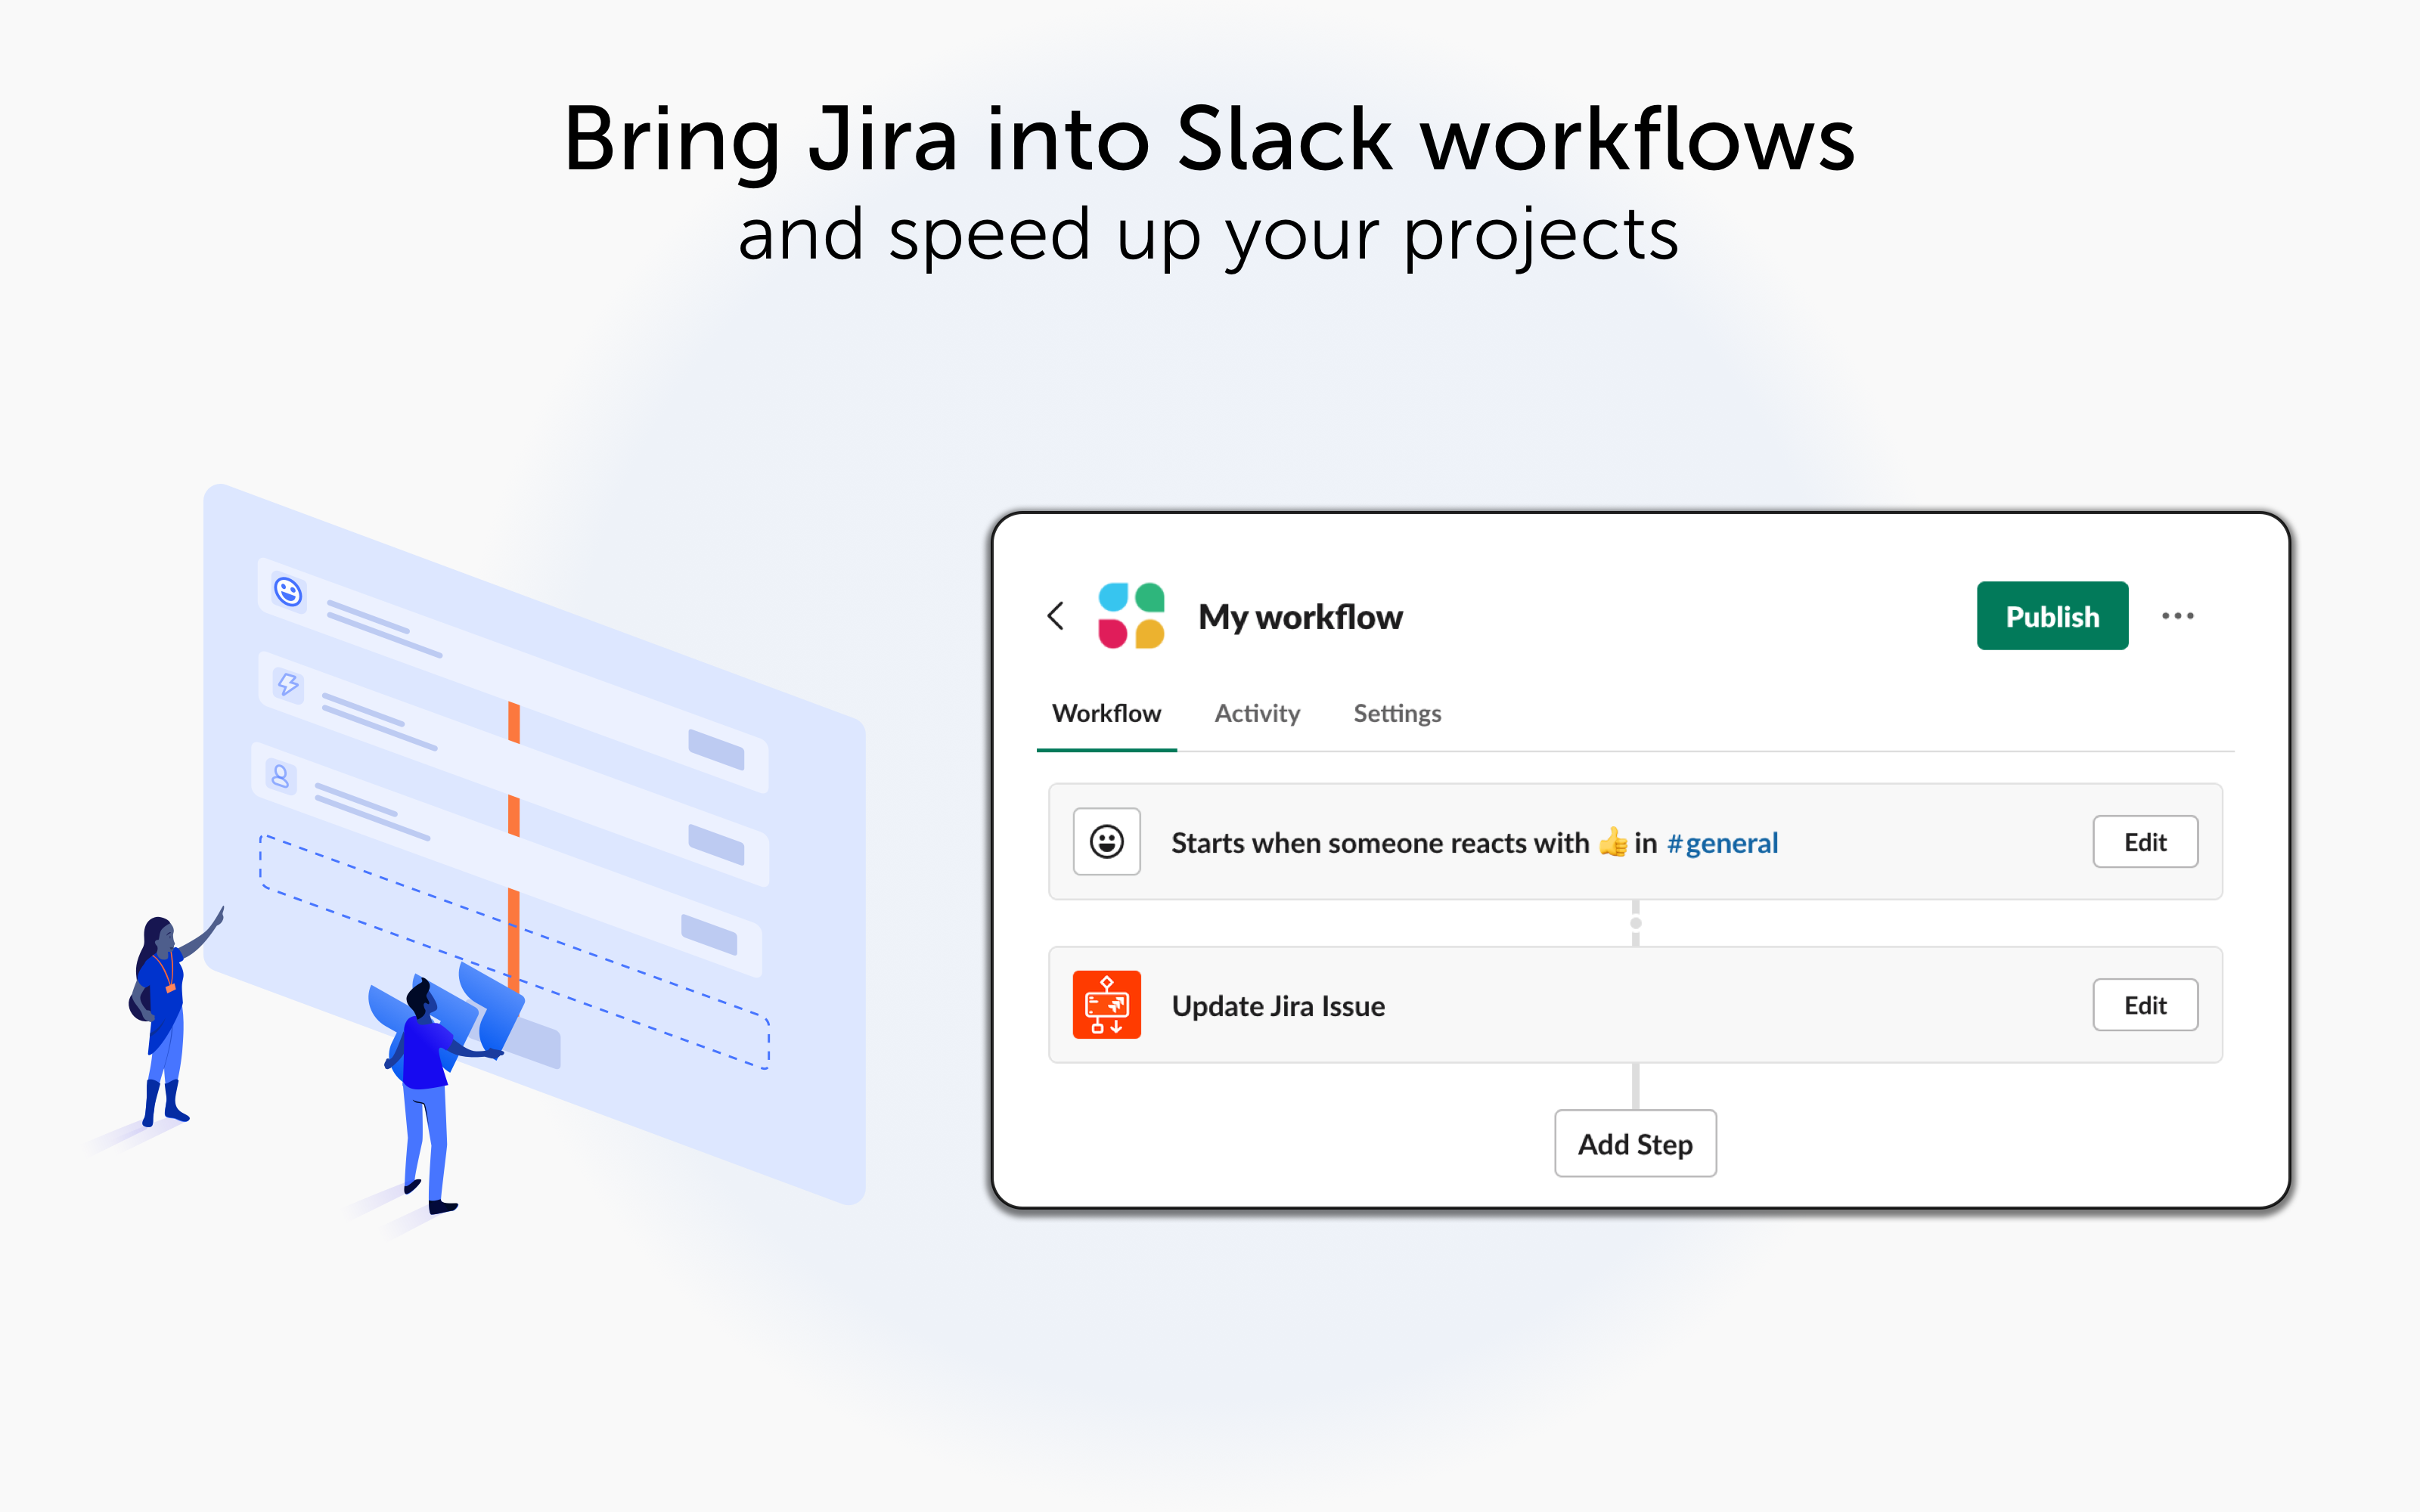 Bring Jira into Slack workflows and speed up your projects. An illustration of two people carrying a Jira logo and bringing it onto Slack's Workflow Builder.